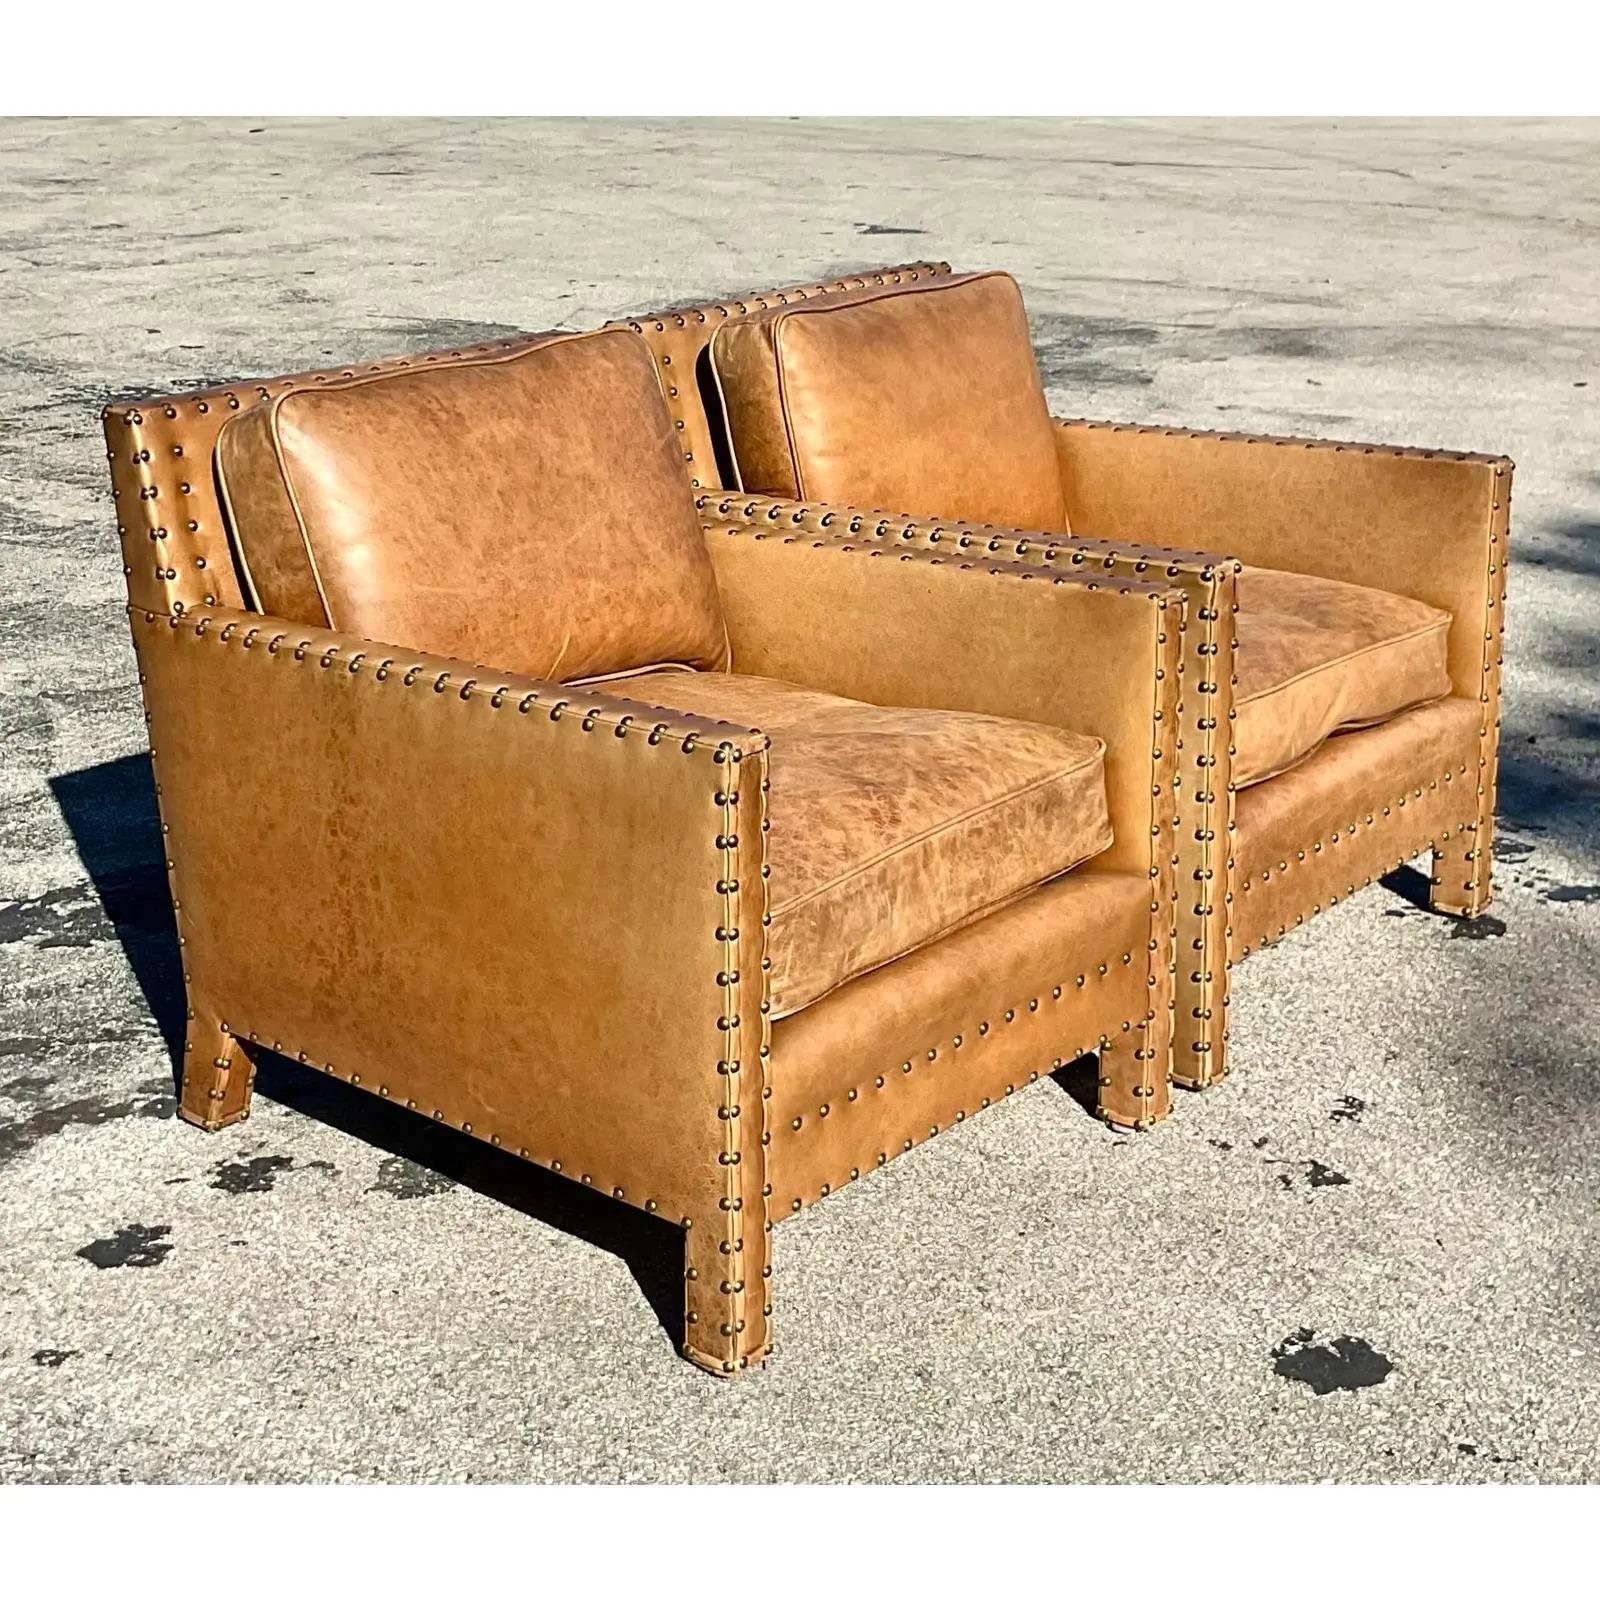 North American Vintage Ralph Lauren Nailhead Distressed Leather Lounge Chairs - a Pair